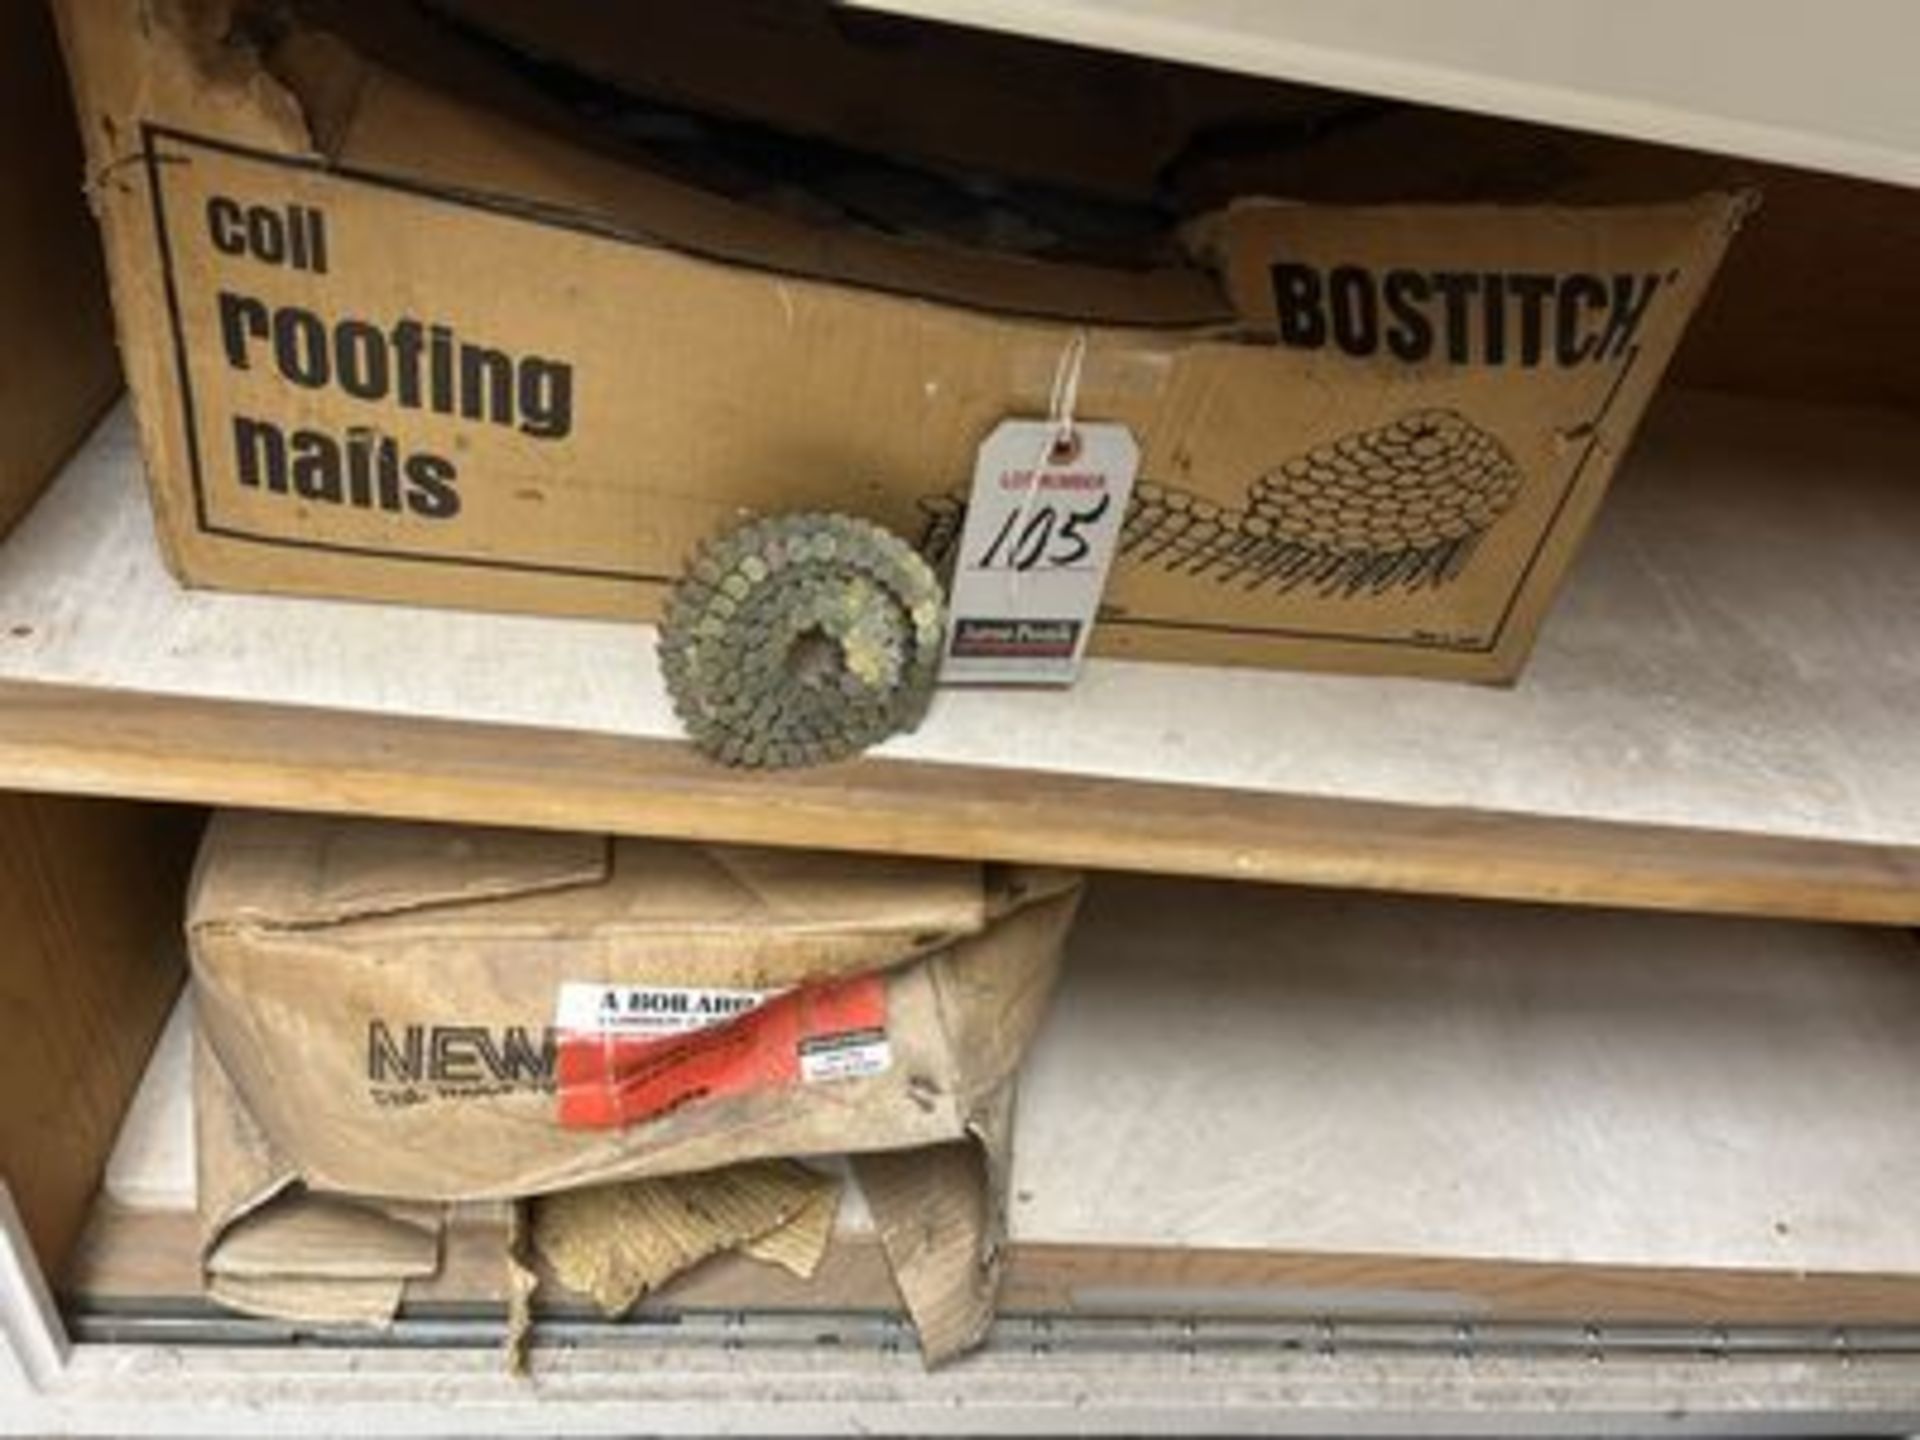 LOT OF BOSTITCH COIL ROOFING NAILS